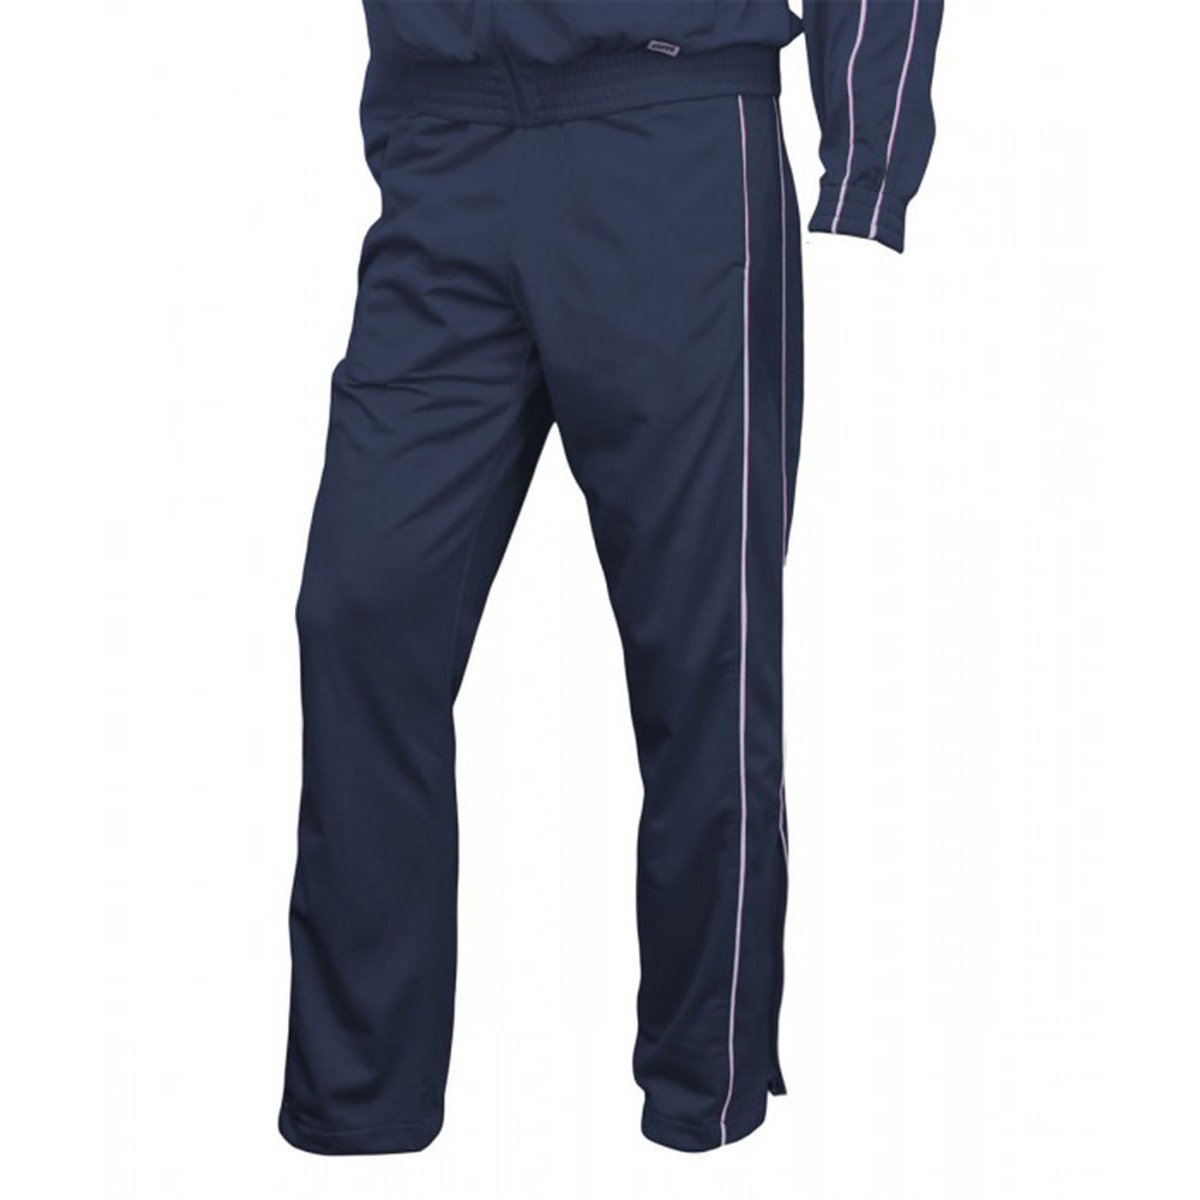 SFA FACULTY STORE Gym Track Pants w/ Logo